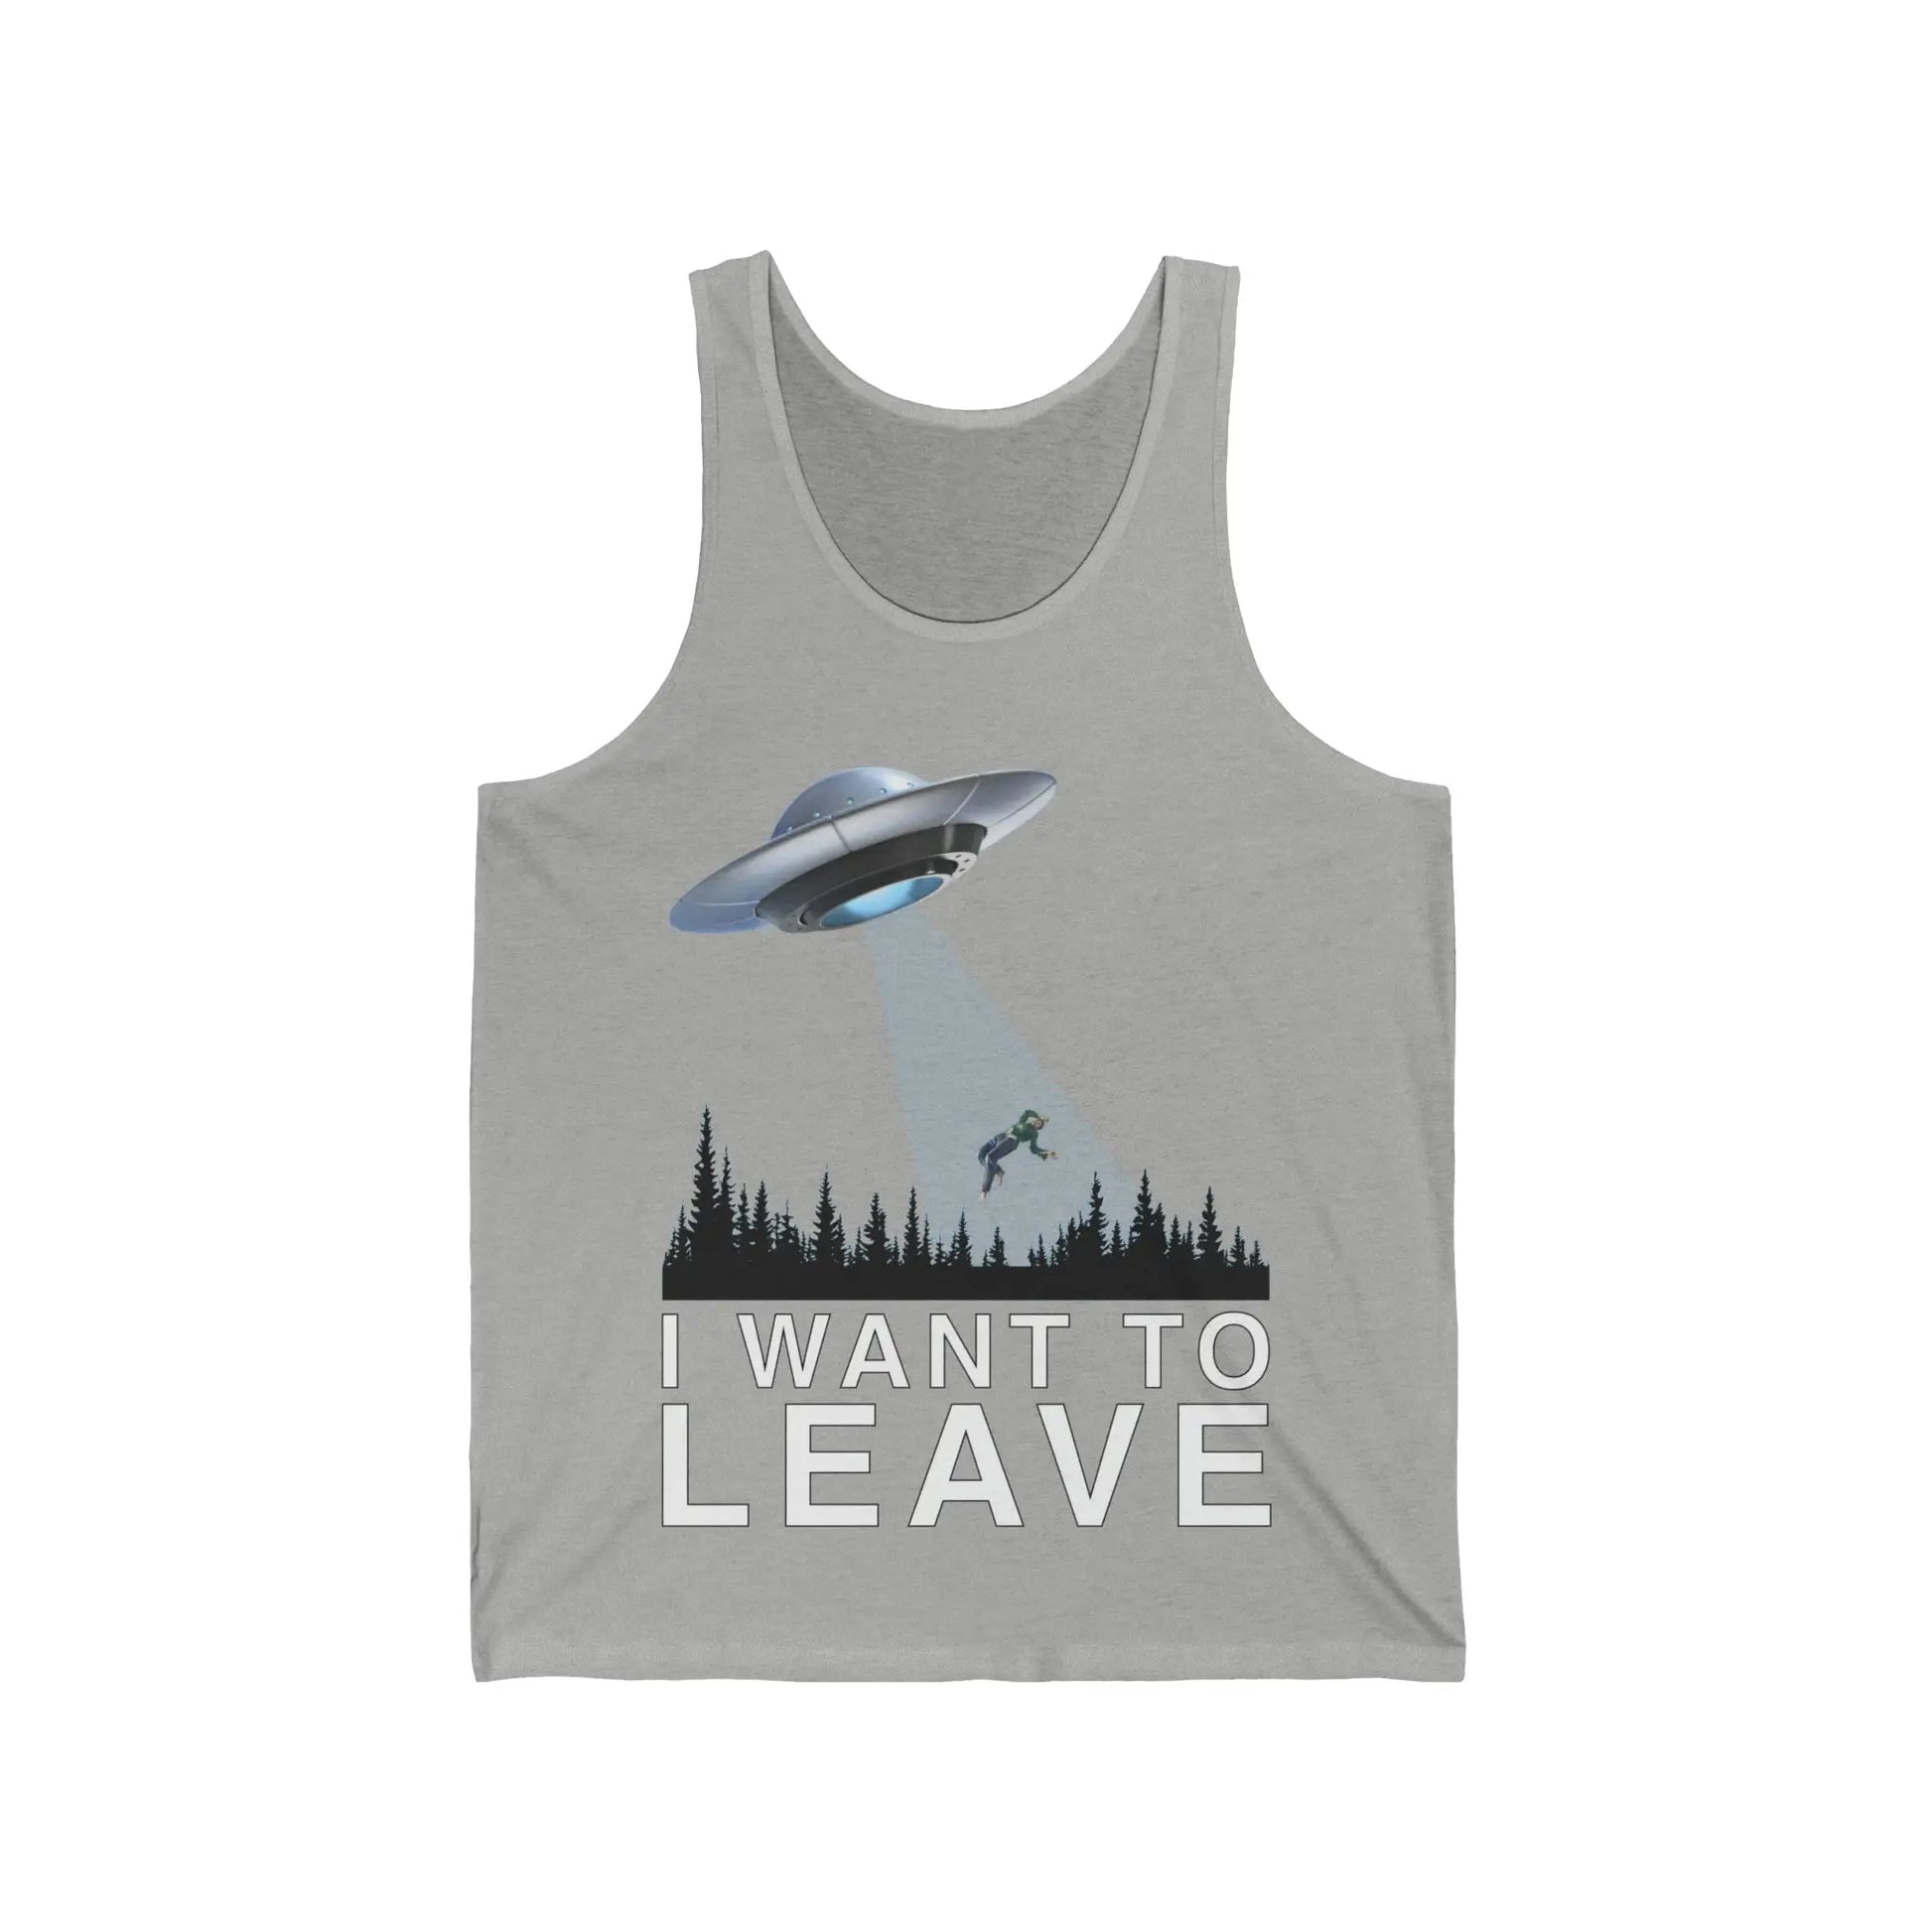 I Want To Leave Men's Jersey Tank - Wicked Tees